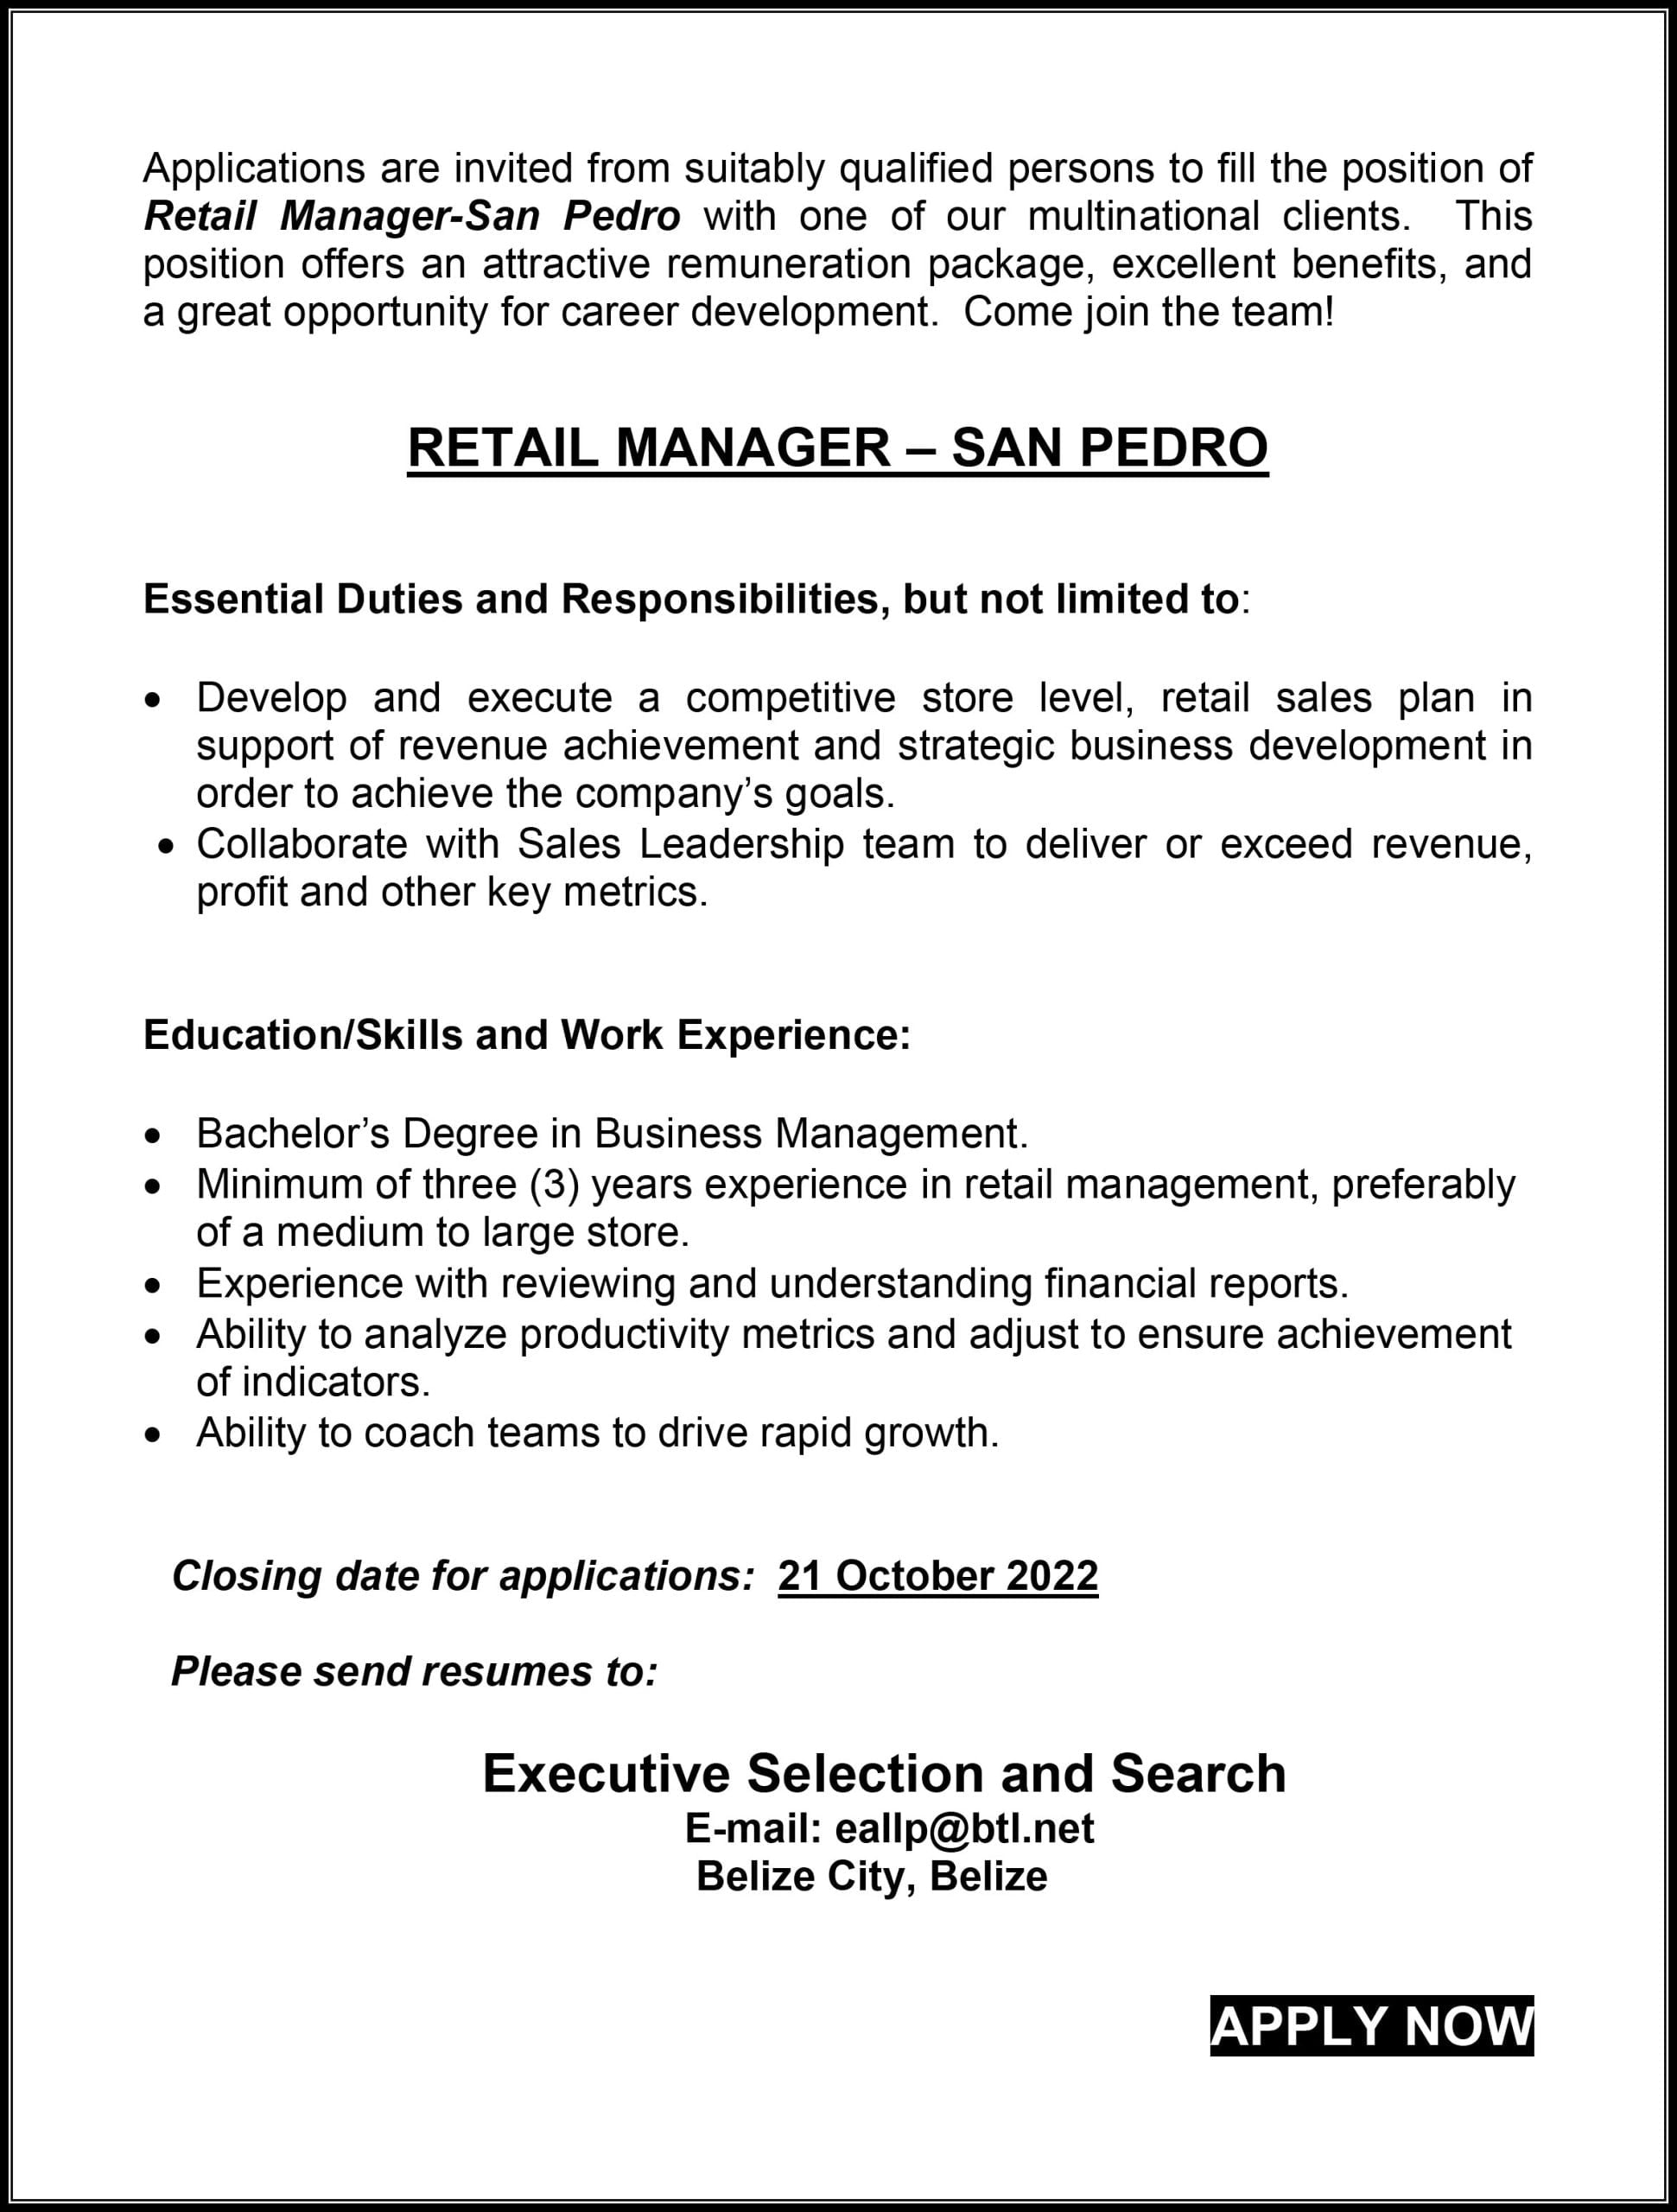 Vacancy Available Retail Manager San Pedro